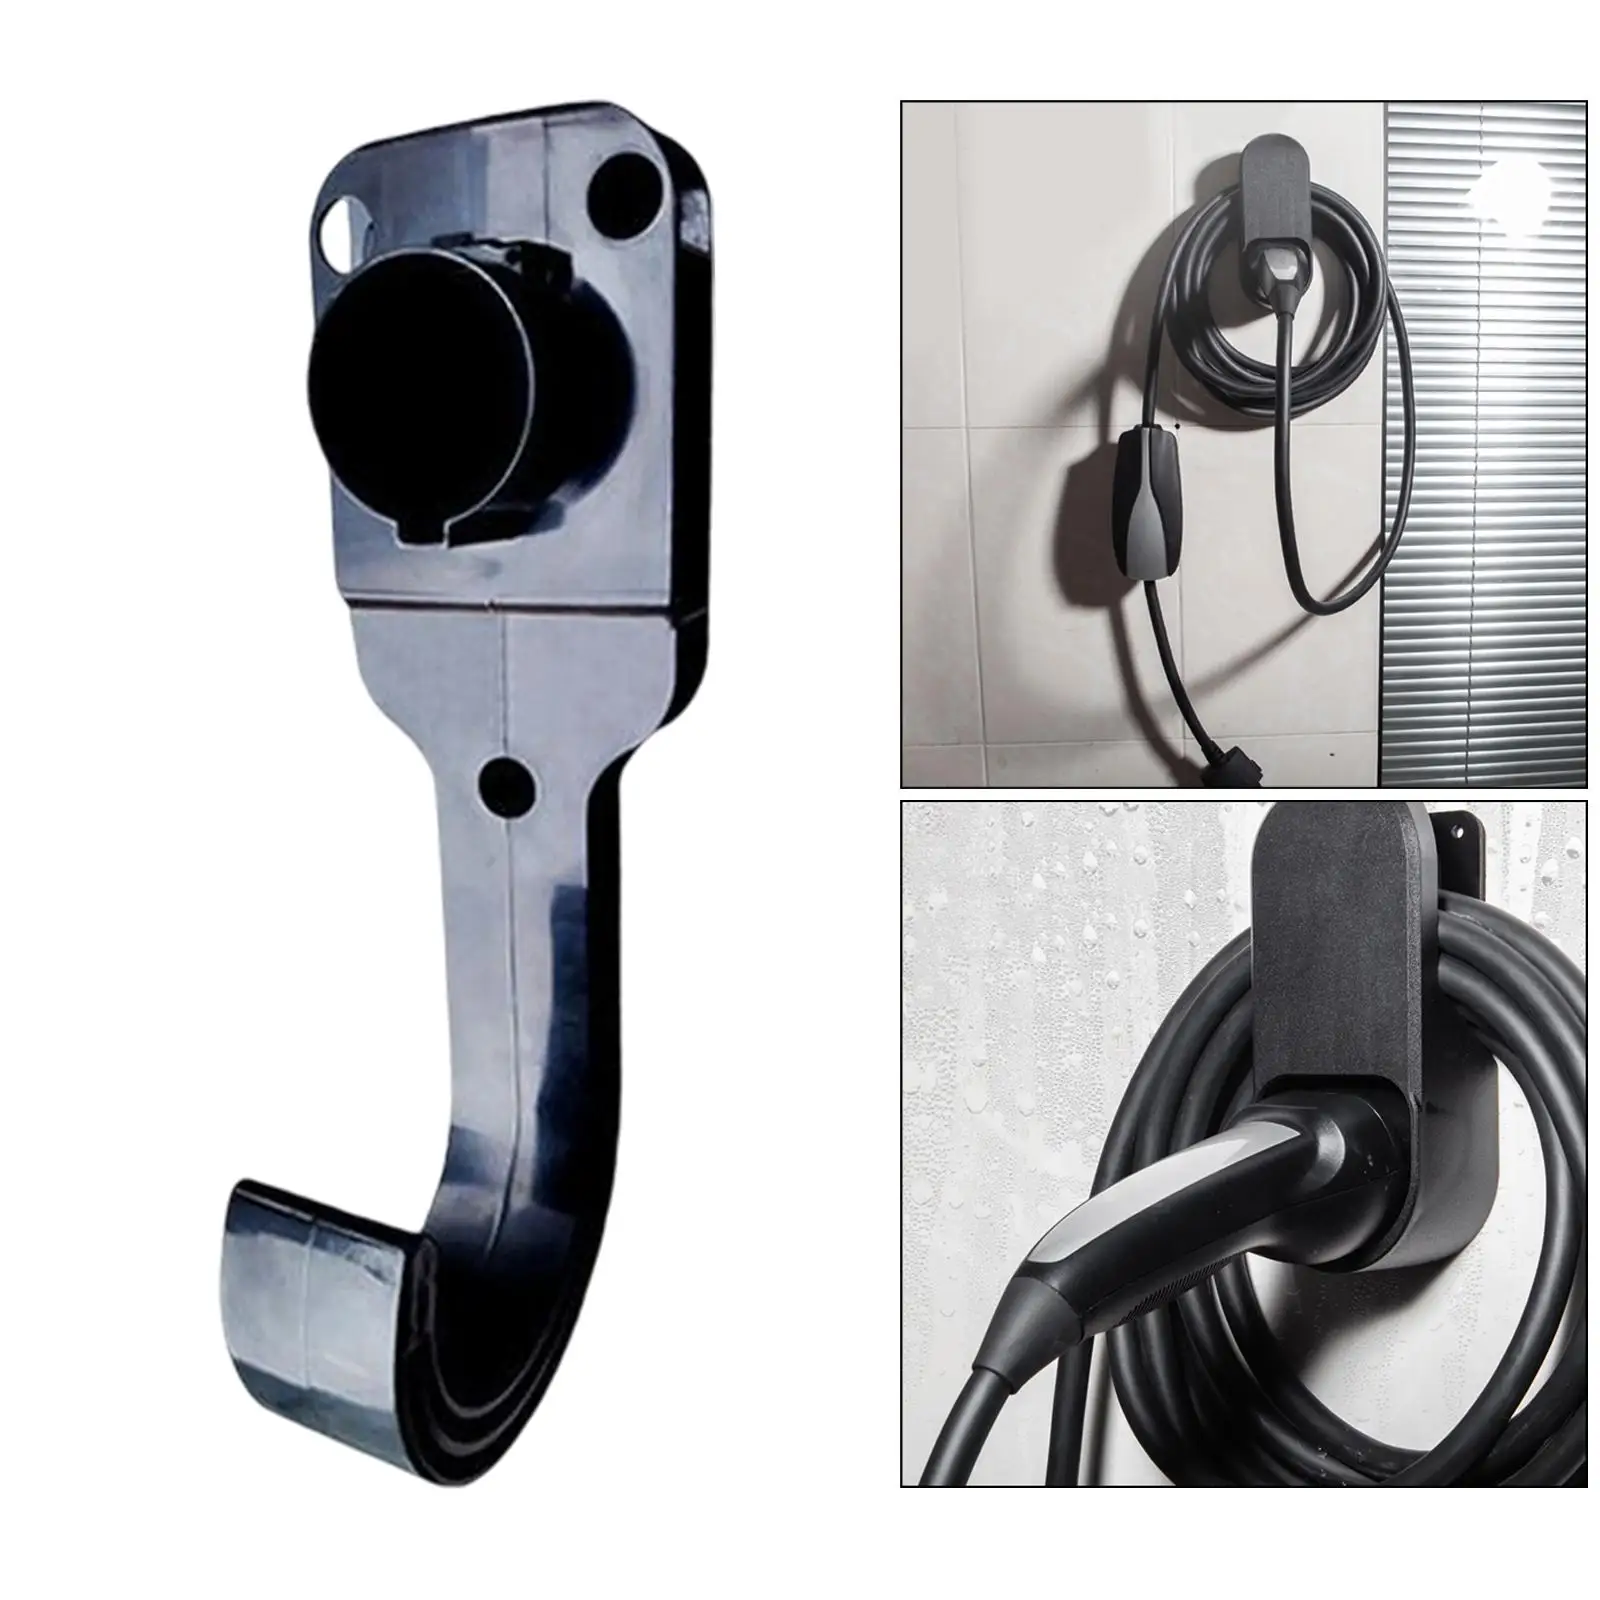 Holder Durable Wall Mount Accessory Professional for Electric Vehicle